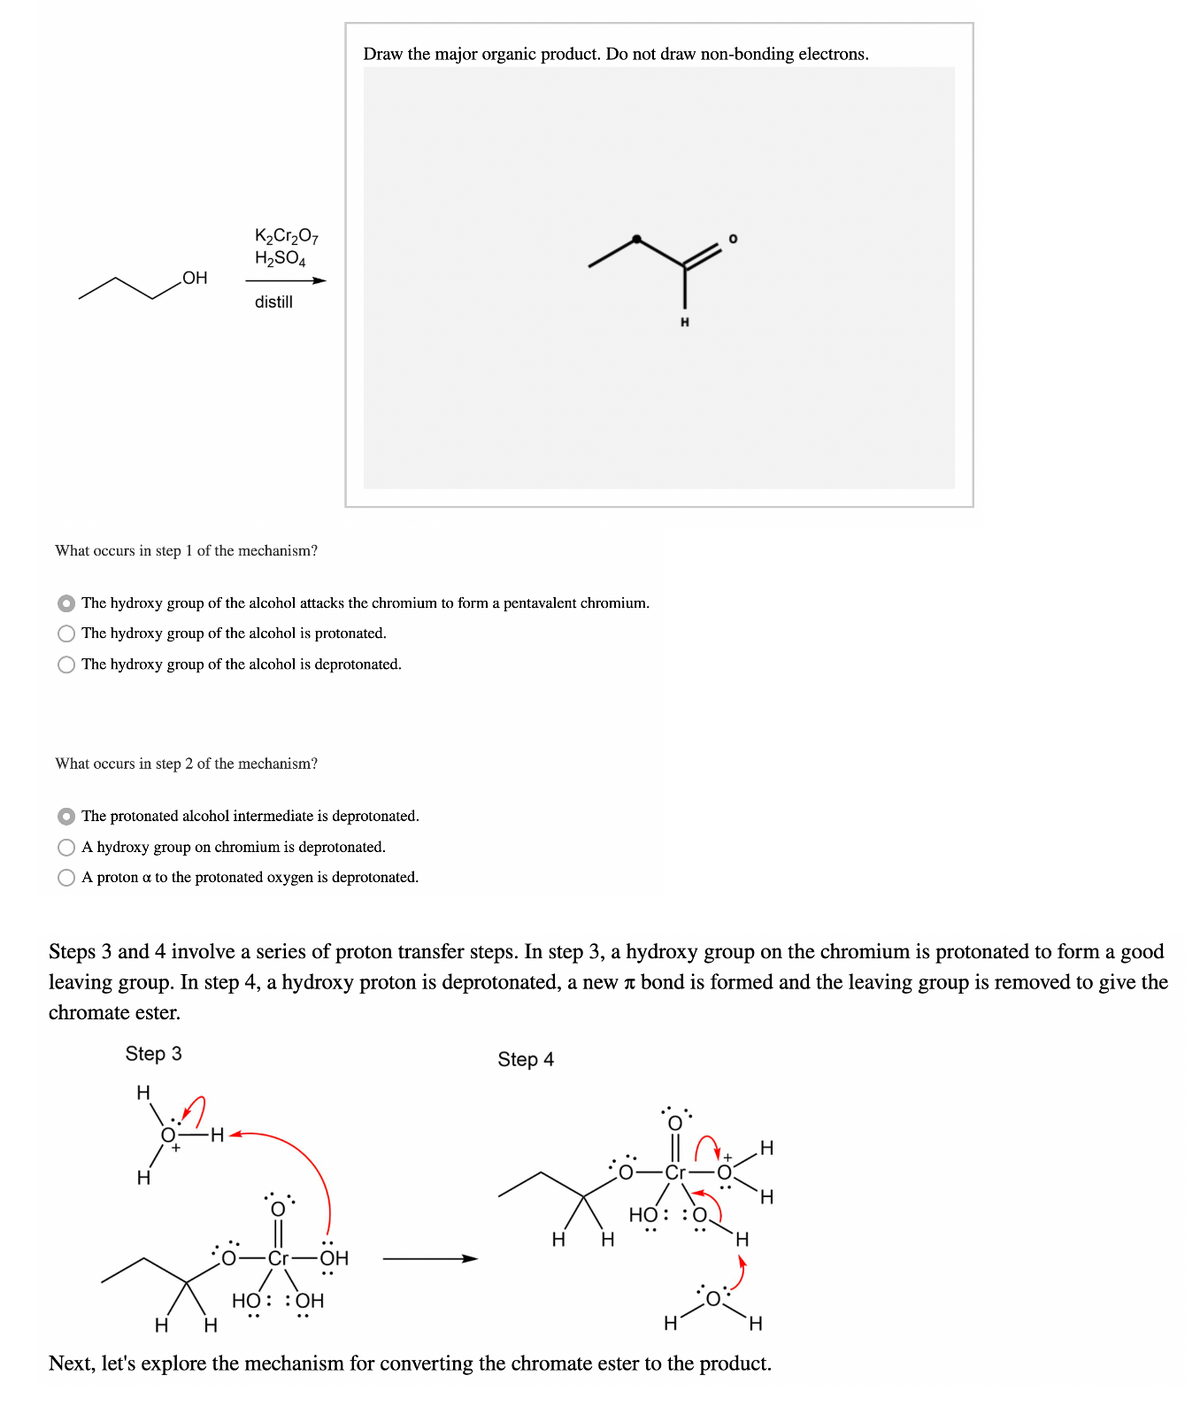 Draw the major organic product. Do not draw non-bonding electrons.
K2Cr207
H2SO4
HOʻ
distill
What occurs in step 1 of the mechanism?
The hydroxy group of the alcohol attacks the chromium to form a pentavalent chromium.
The hydroxy group of the alcohol is protonated.
O The hydroxy group of the alcohol is deprotonated.
What occurs in step 2 of the mechanism?
O The protonated alcohol intermediate is deprotonated.
O A hydroxy group on chromium is deprotonated.
A proton a to the protonated oxygen is deprotonated.
Steps 3 and 4 involve a series of proton transfer steps. In step 3, a hydroxy group on the chromium is protonated to form a good
leaving group. In step 4, a hydroxy proton is deprotonated, a new t bond is formed and the leaving group is removed to give the
chromate ester.
Step 3
Step 4
H
H-
H.
H.
HỒ: :0,
H
H.
Cr-OH
HO: :OH
H
H.
Next, let's explore the mechanism for converting the chromate ester to the product.
